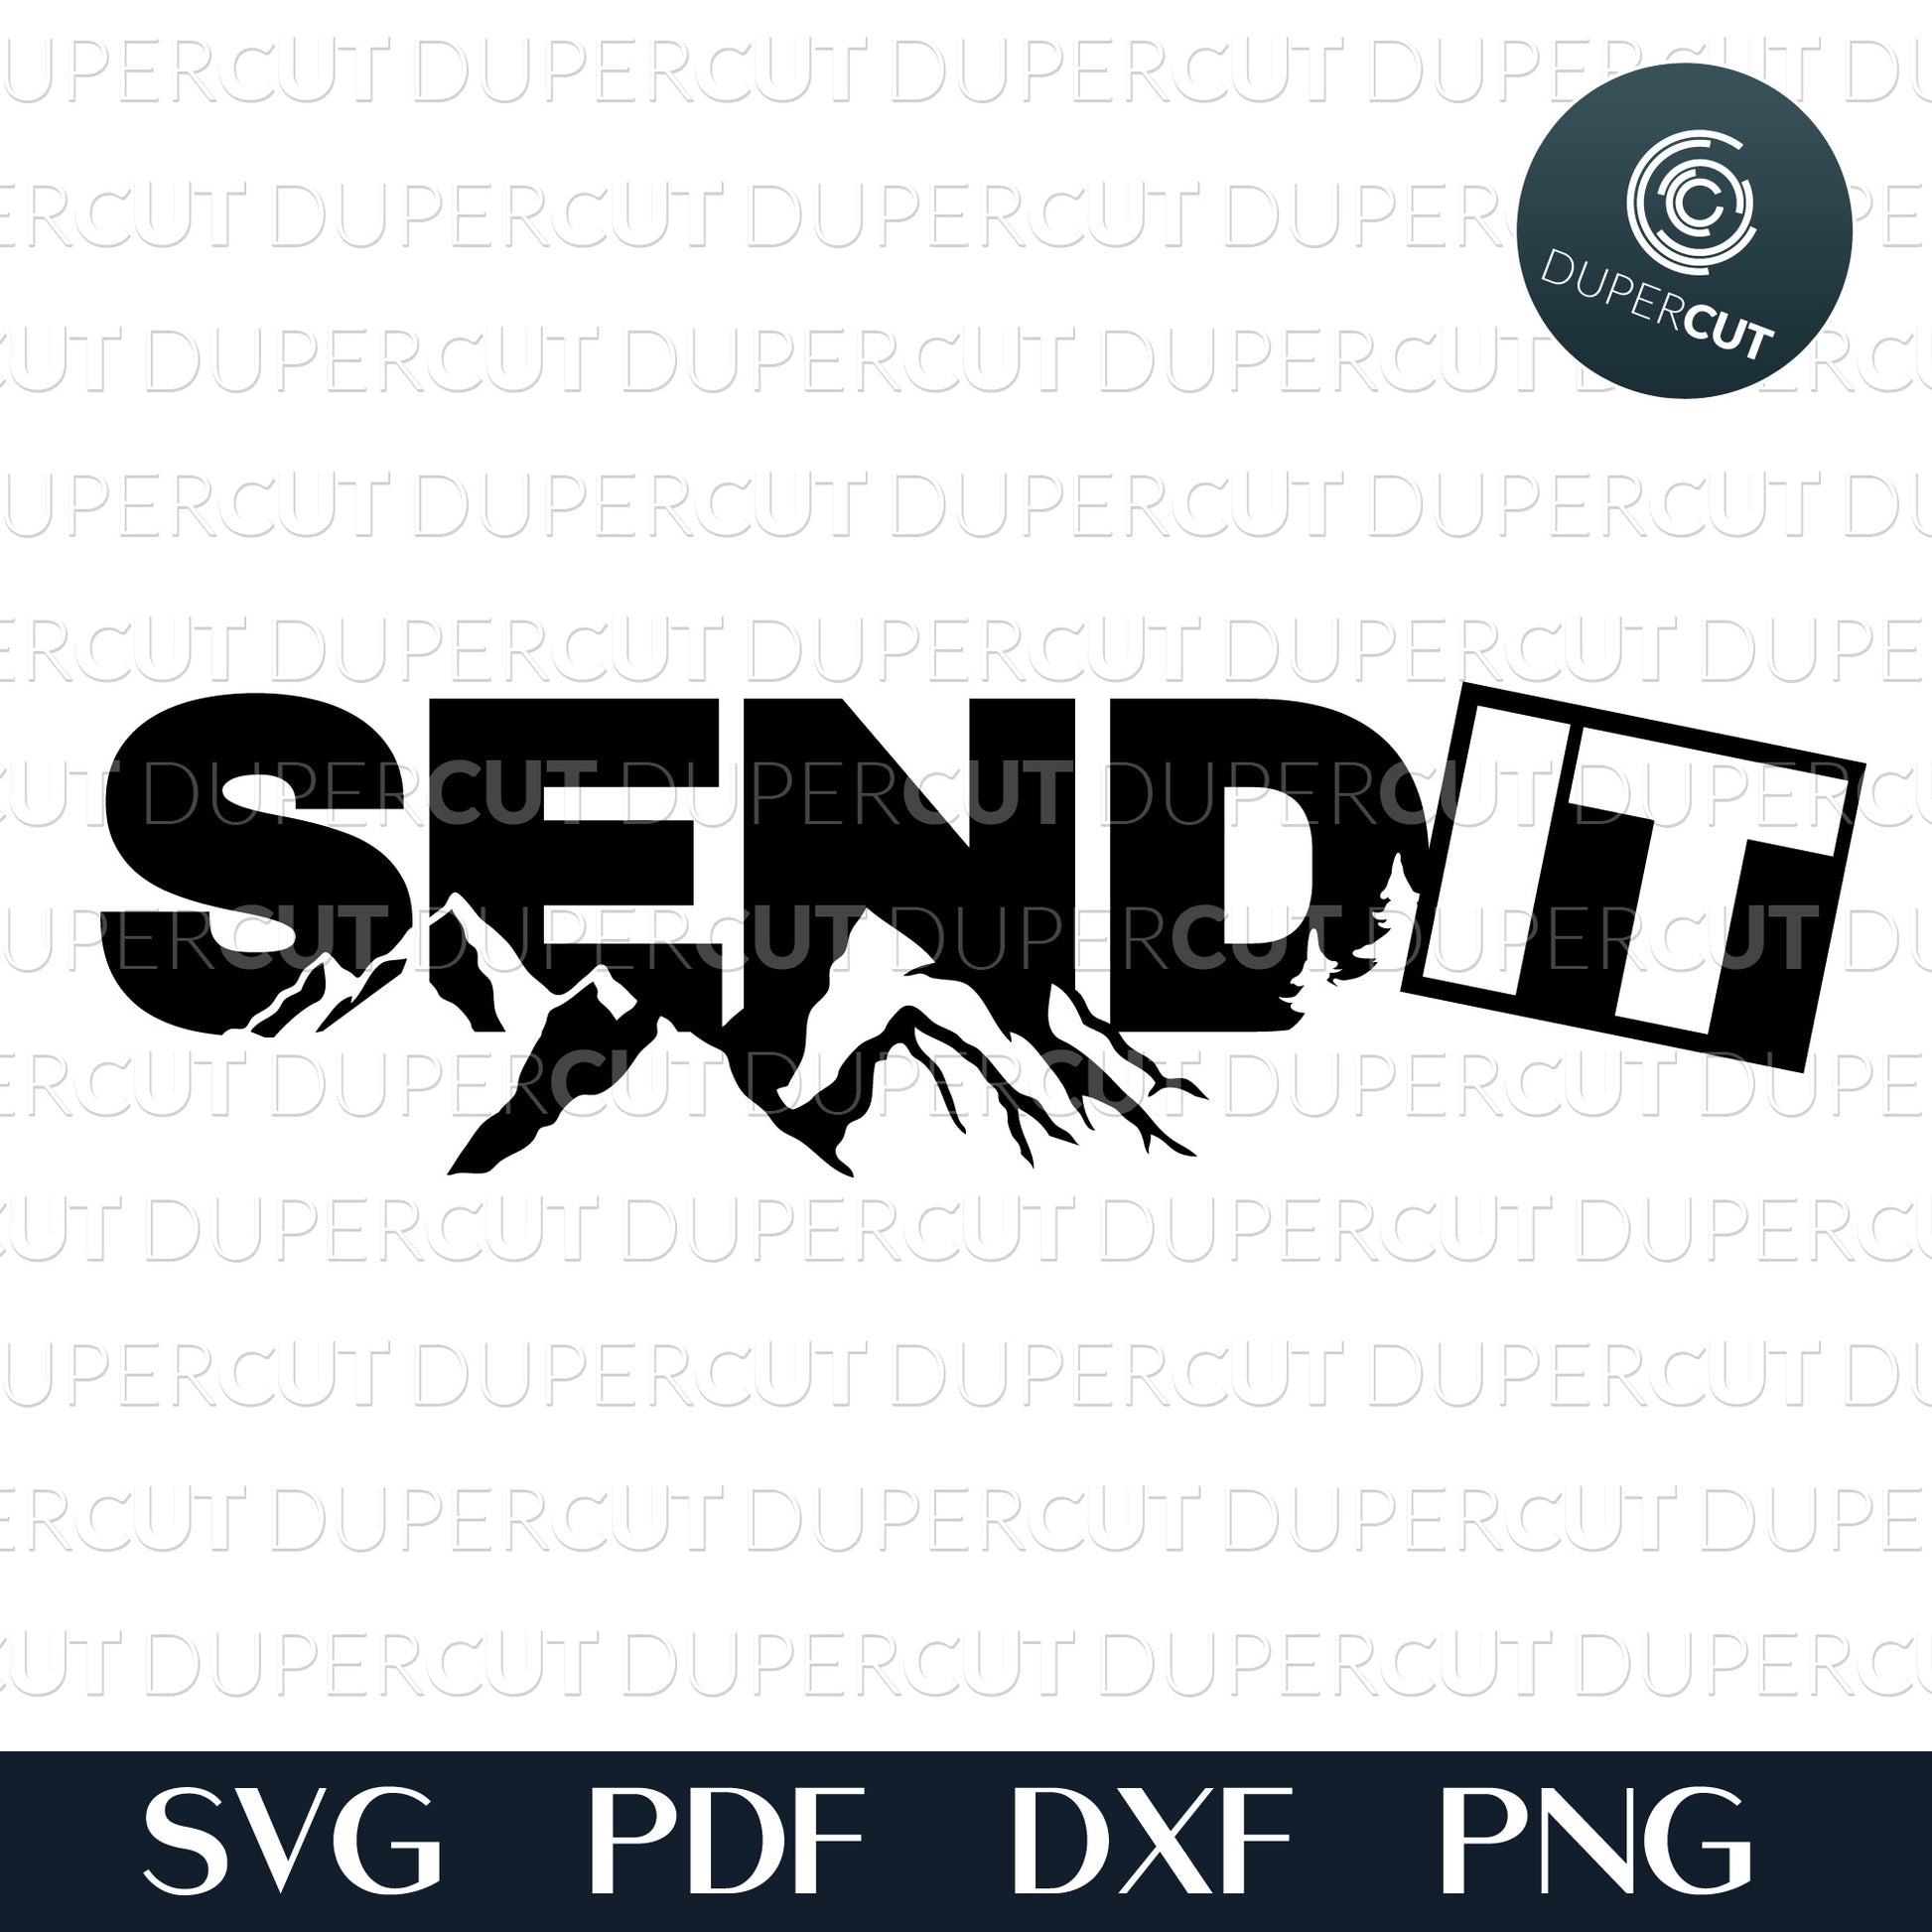 SEND IT - custom original design for stickers. SVG PNG DXF cutting files for Cricut, Silhouette, Glowforge, print on demand, sublimation templates